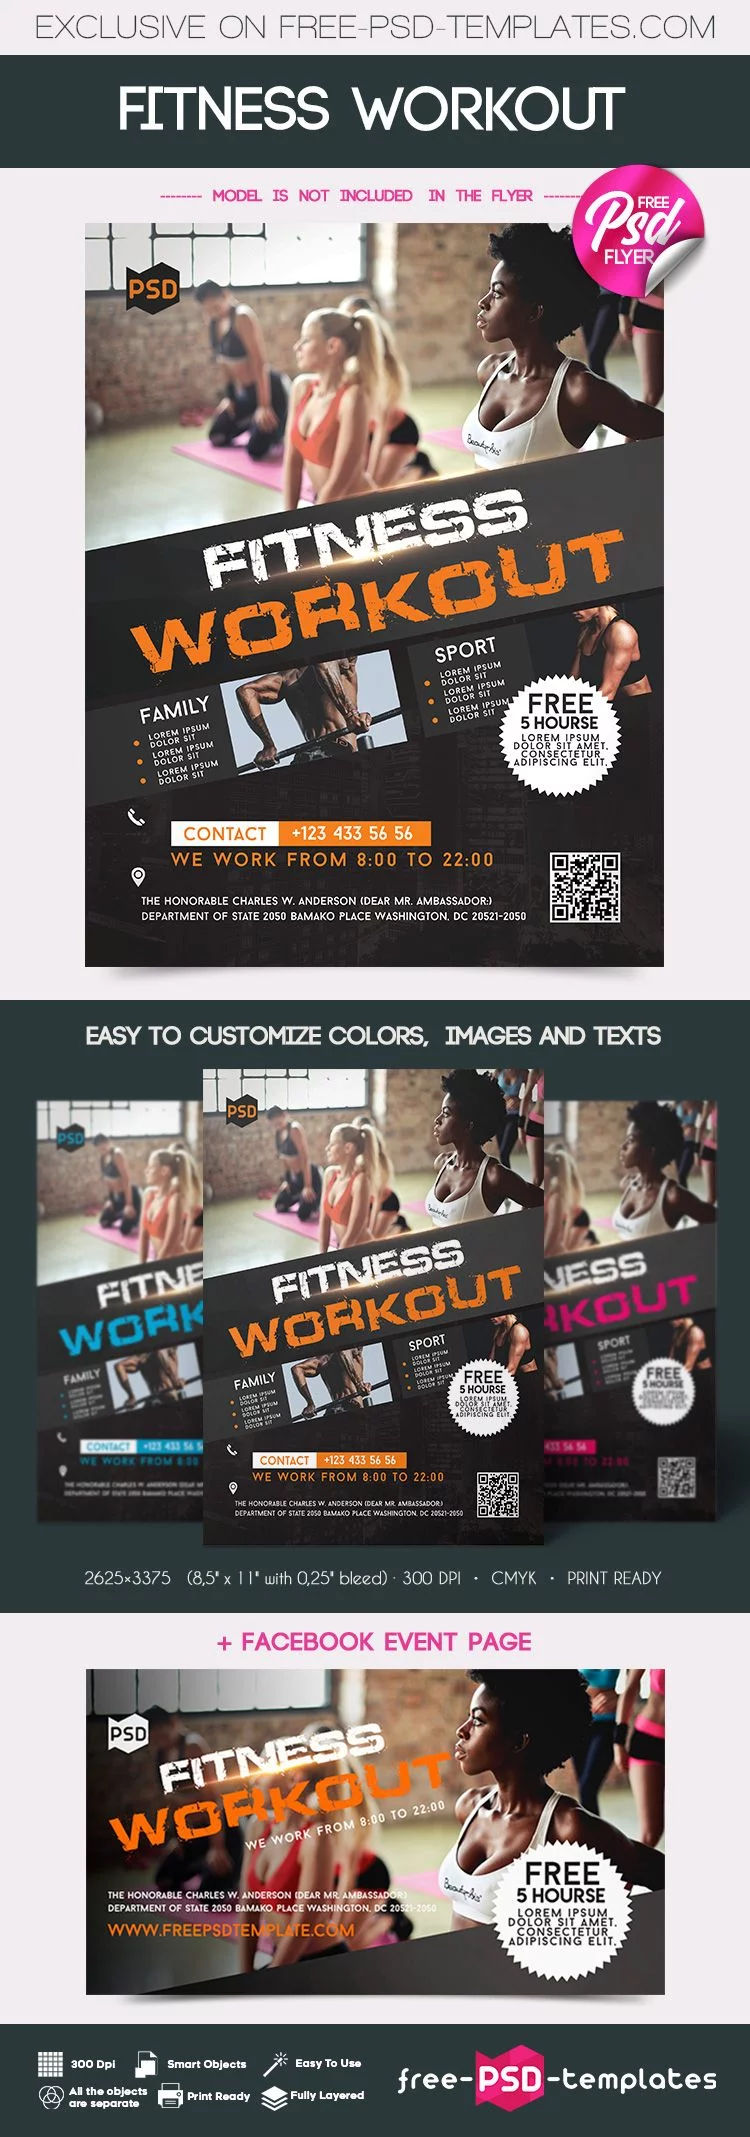 Free Fitness Workout Flyer in PSD